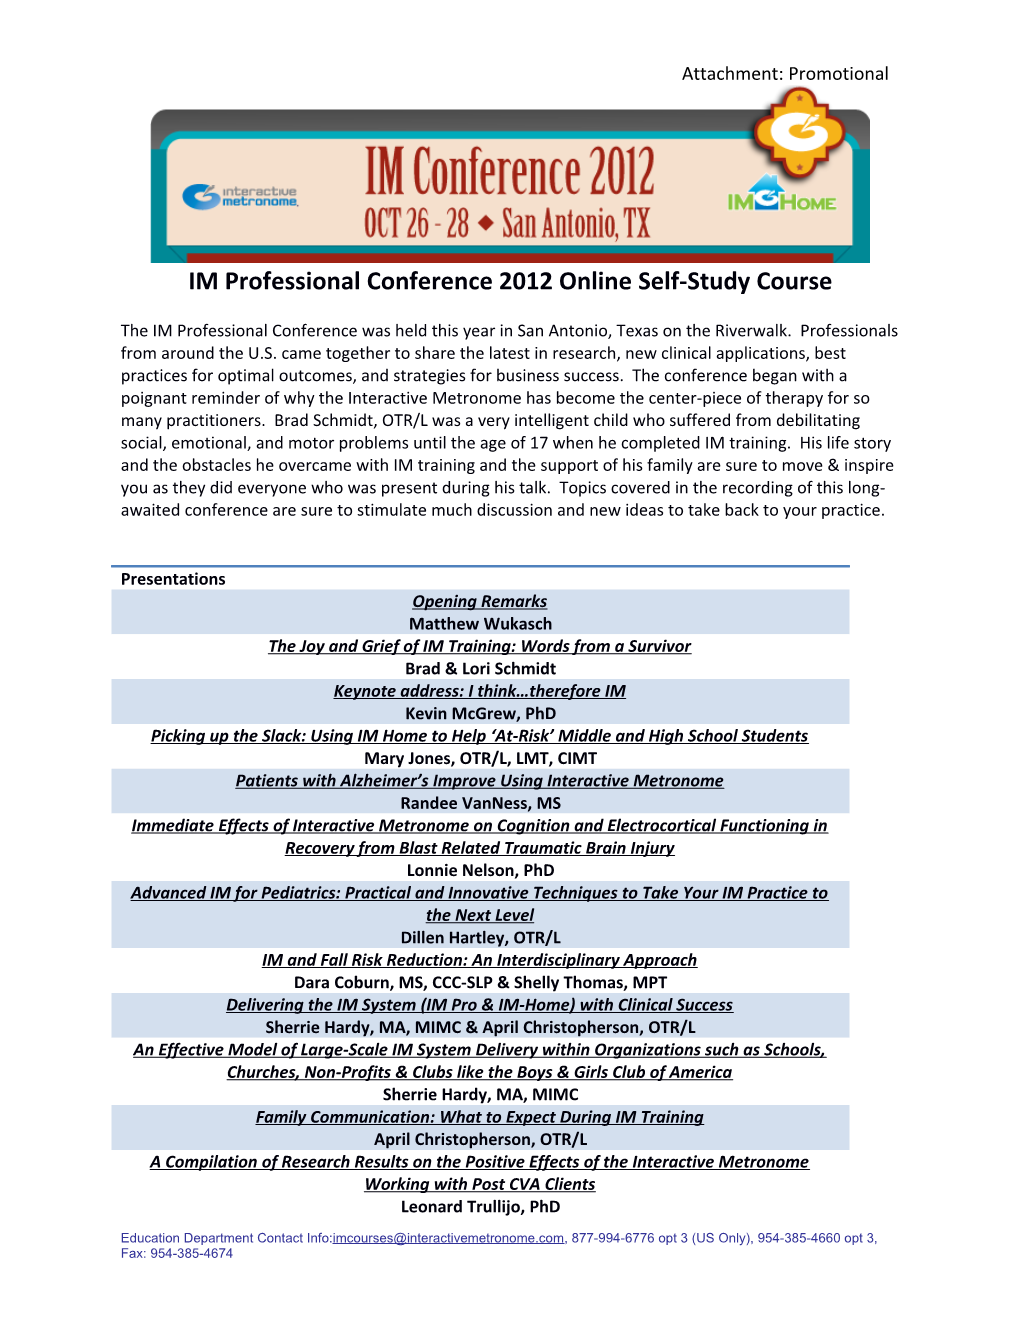 IM Professional Conference 2012 Online Self-Study Course